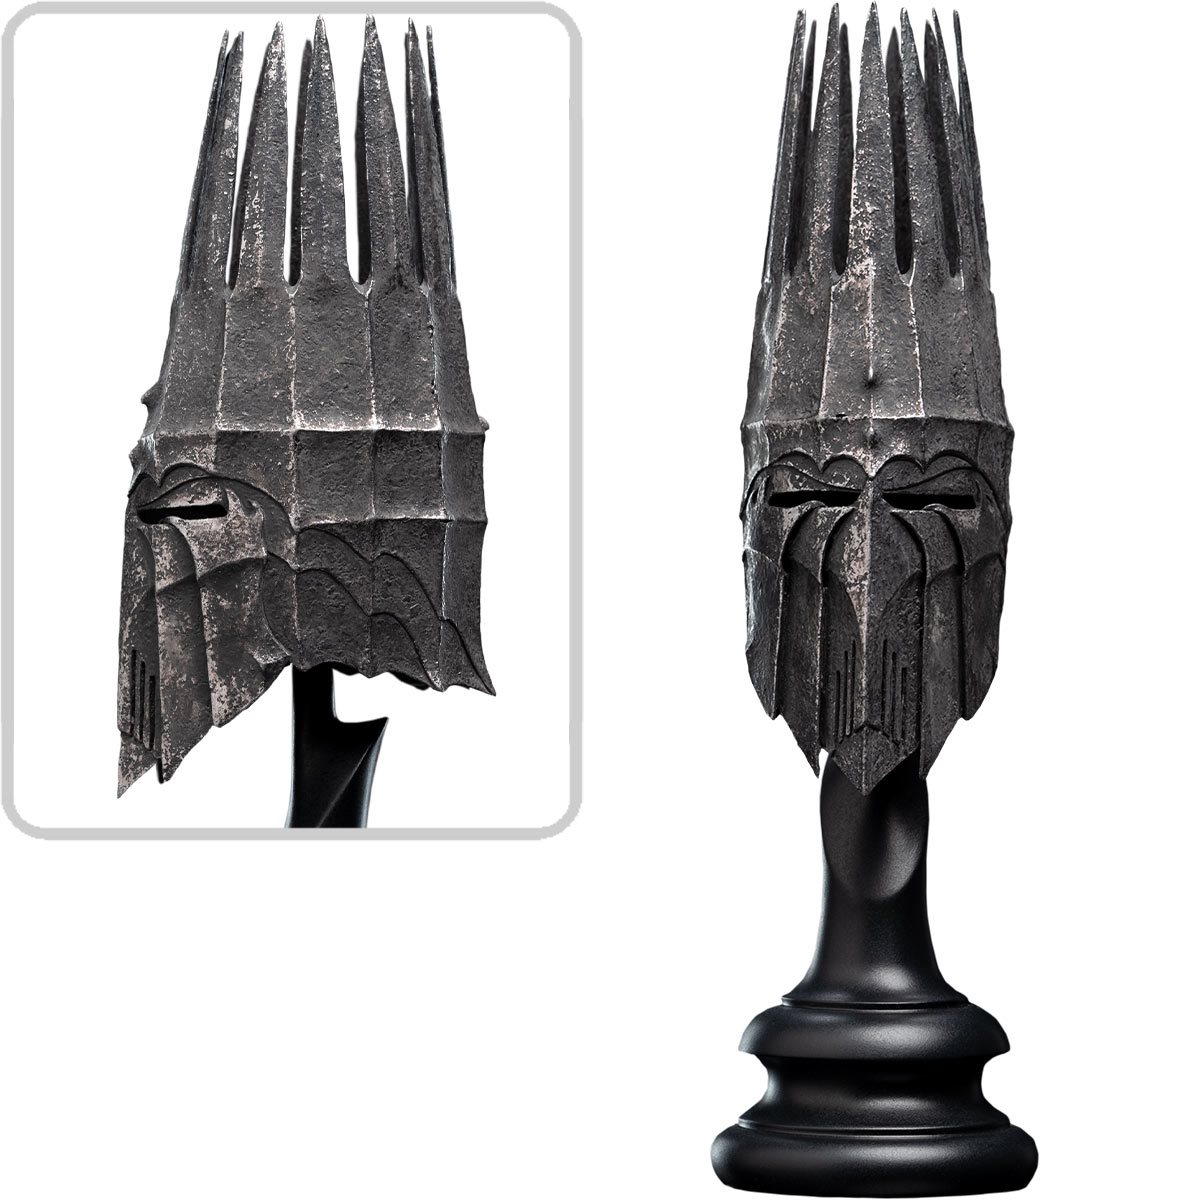 Life-Sized Lord of the Rings Crown of Gondor Costs $750